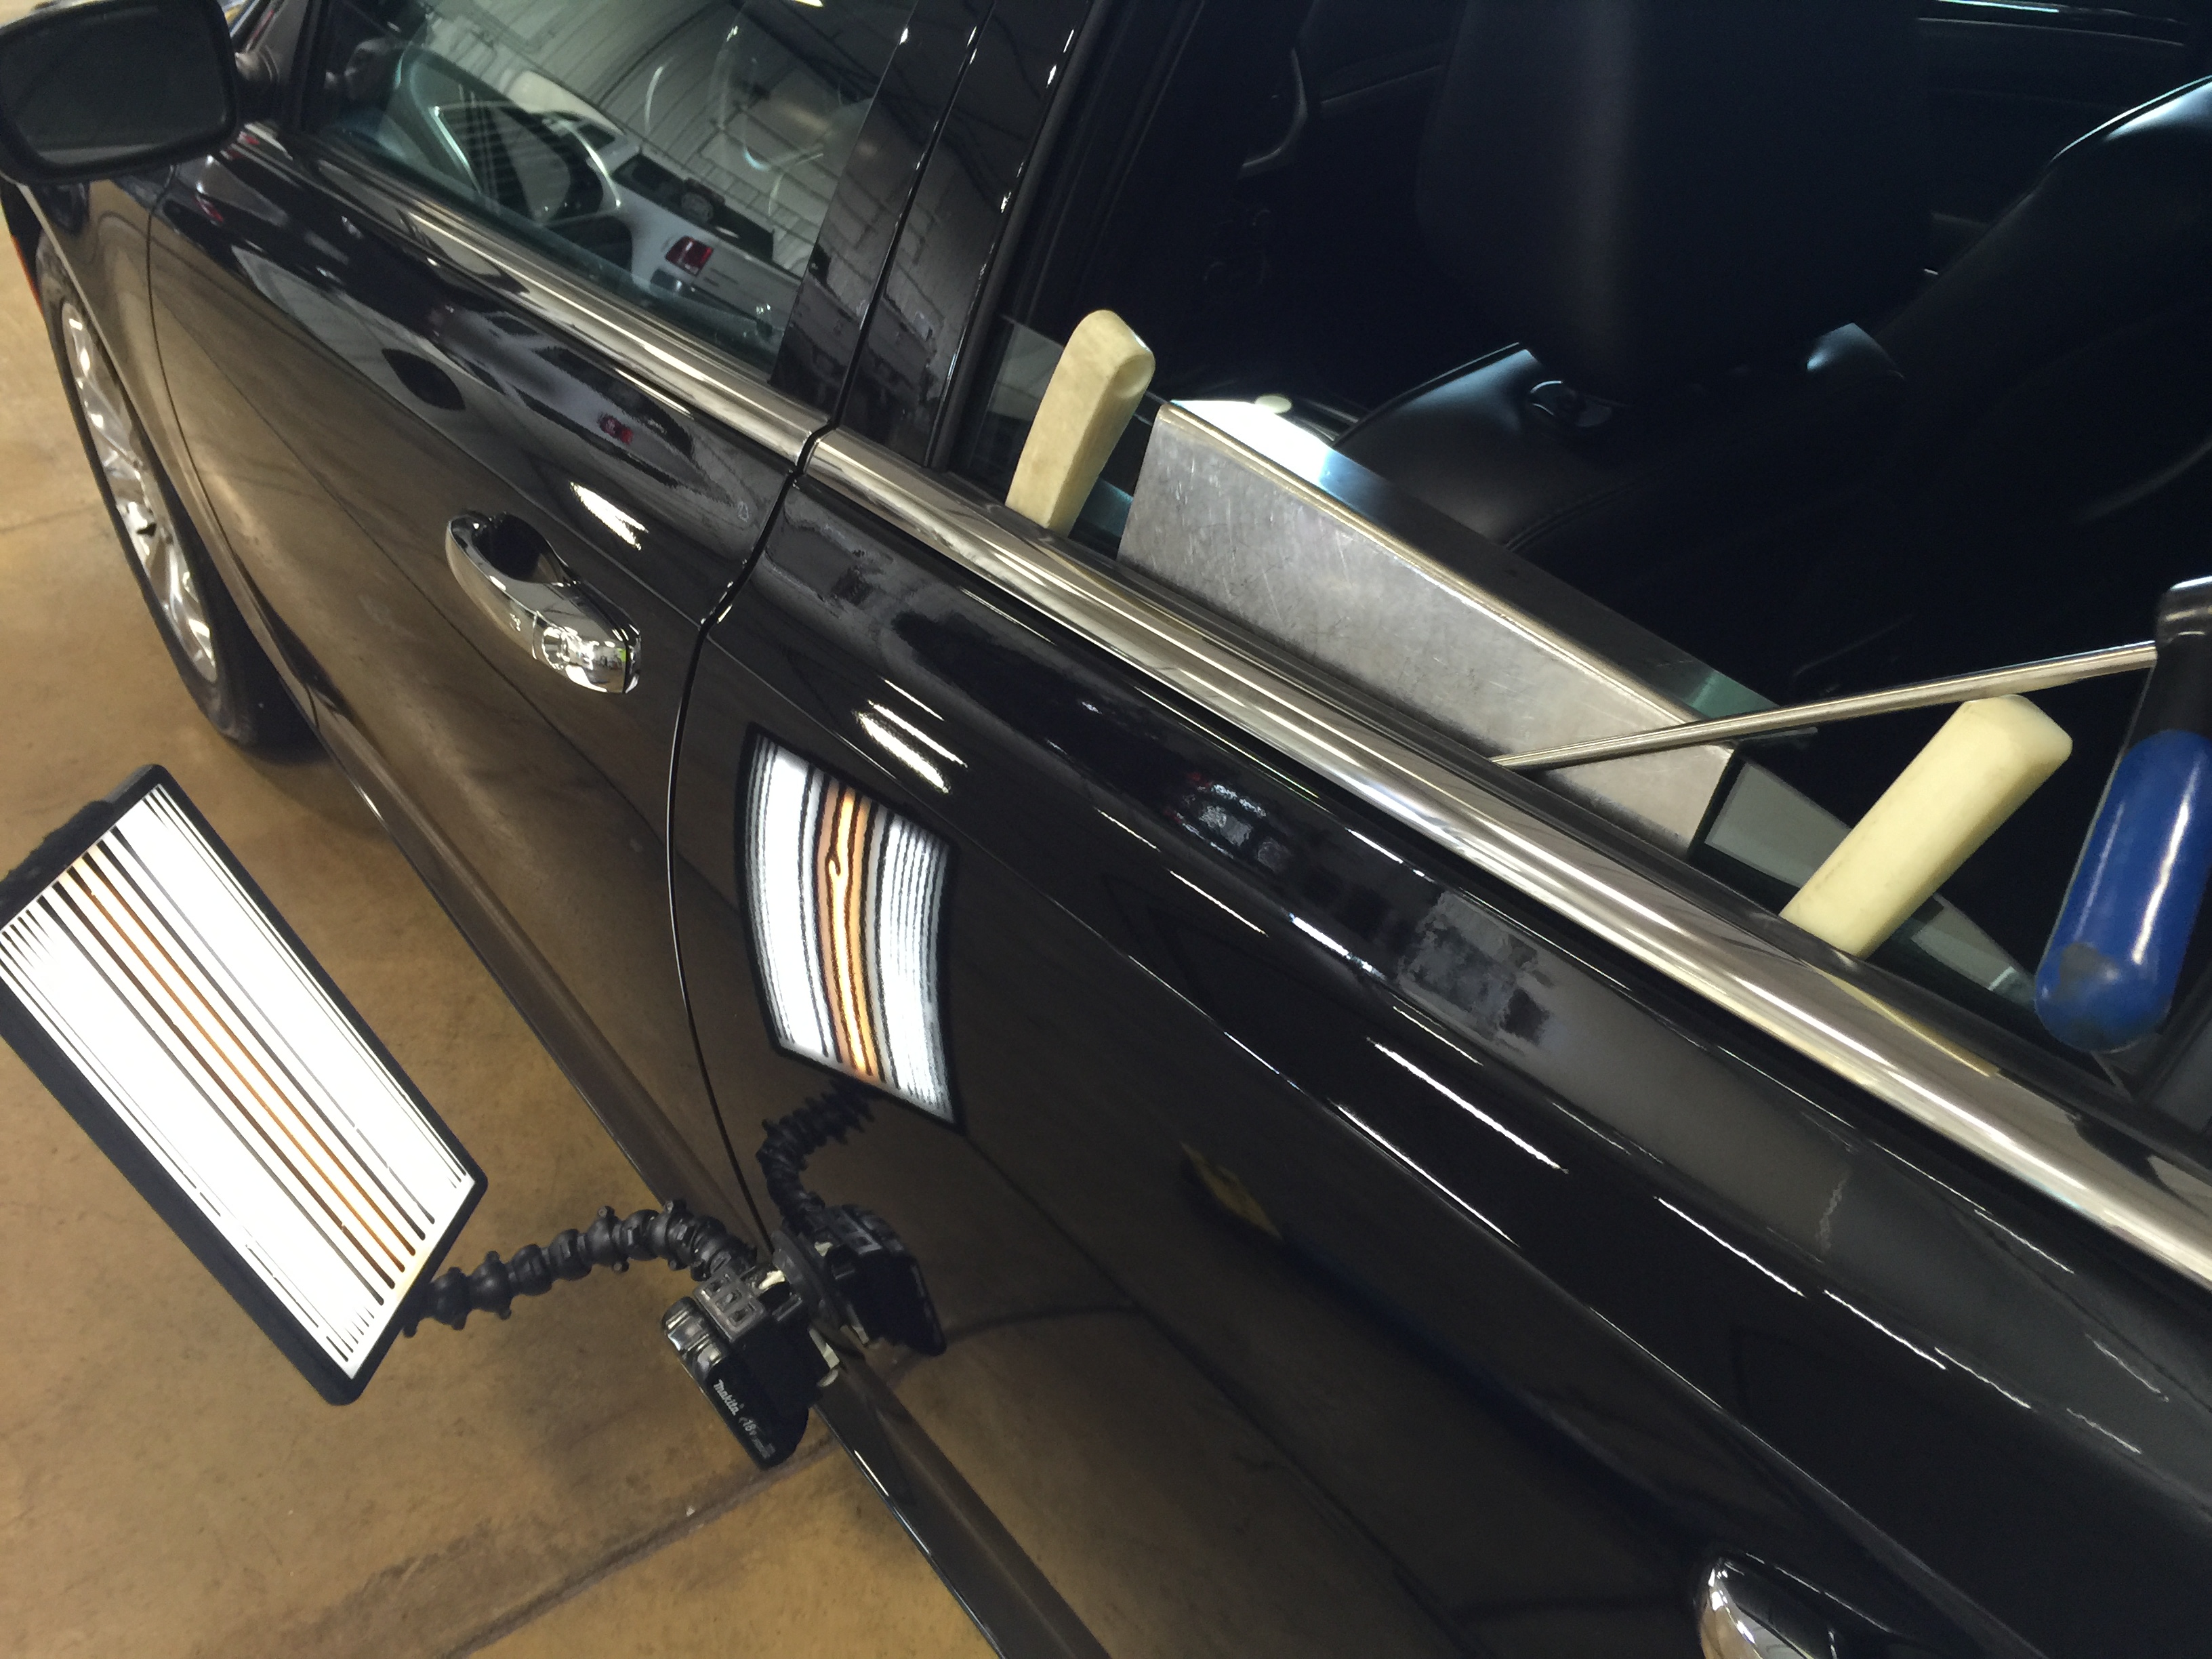 2016 Chrysler 300 C dent removal on drivers side rear door, Springfield IL, http://217dent.com